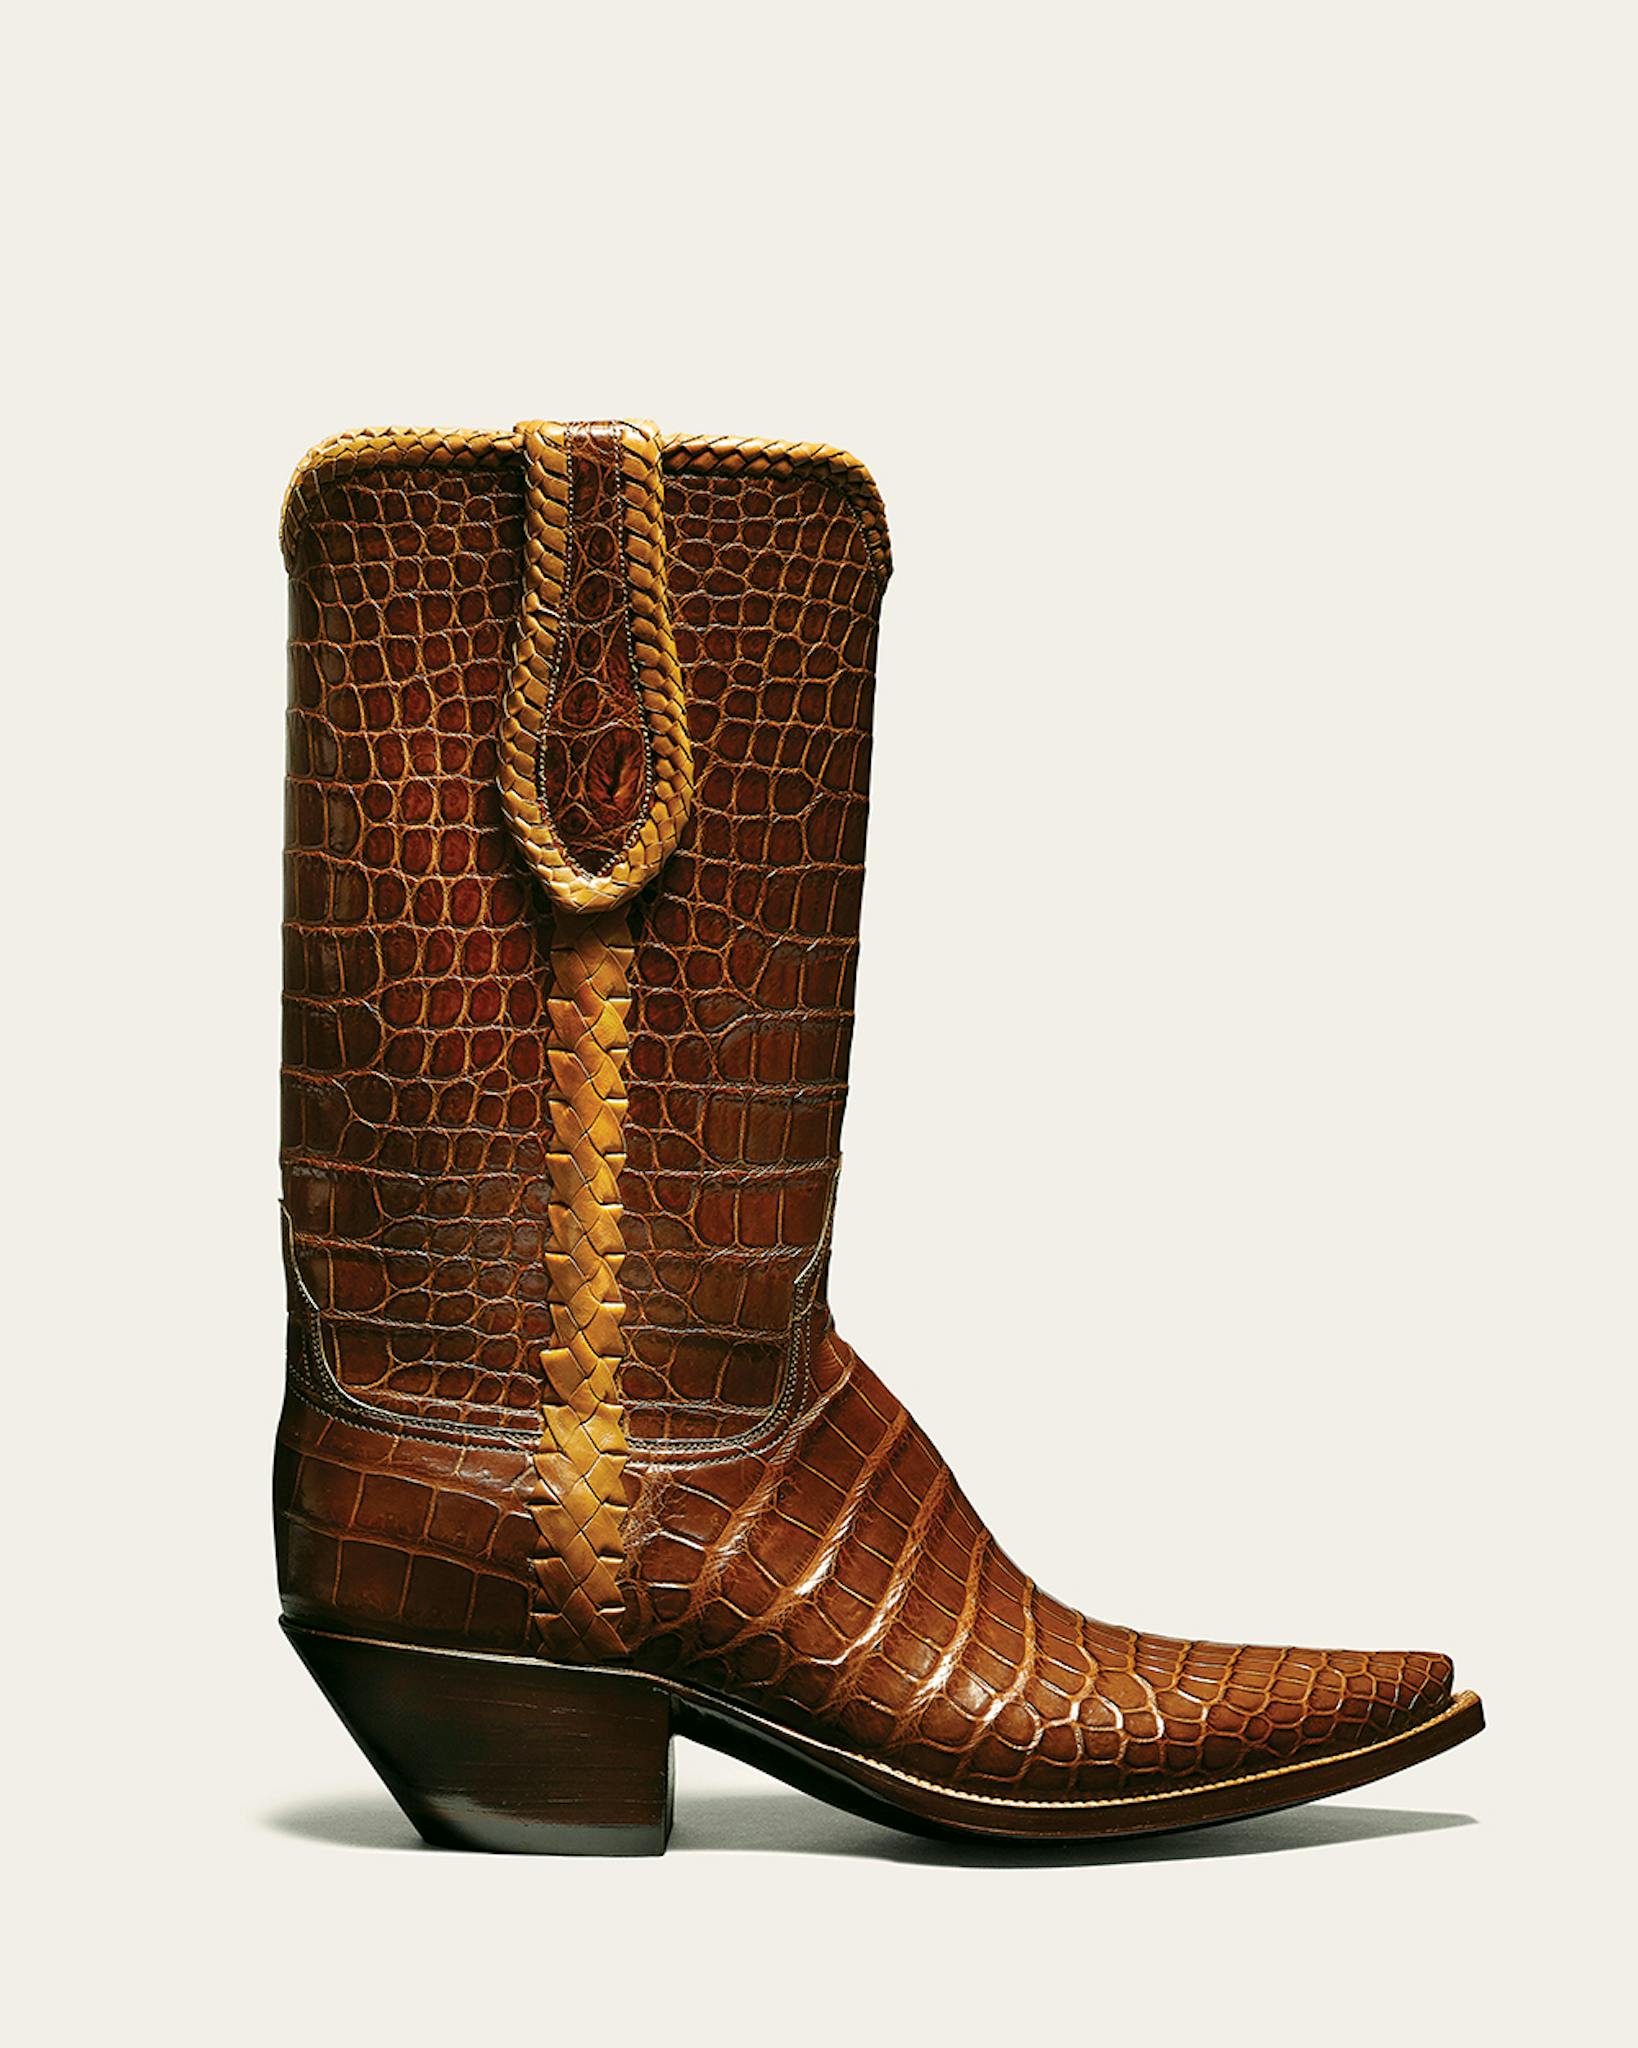 Little's Boot Company brown animal skin boot.